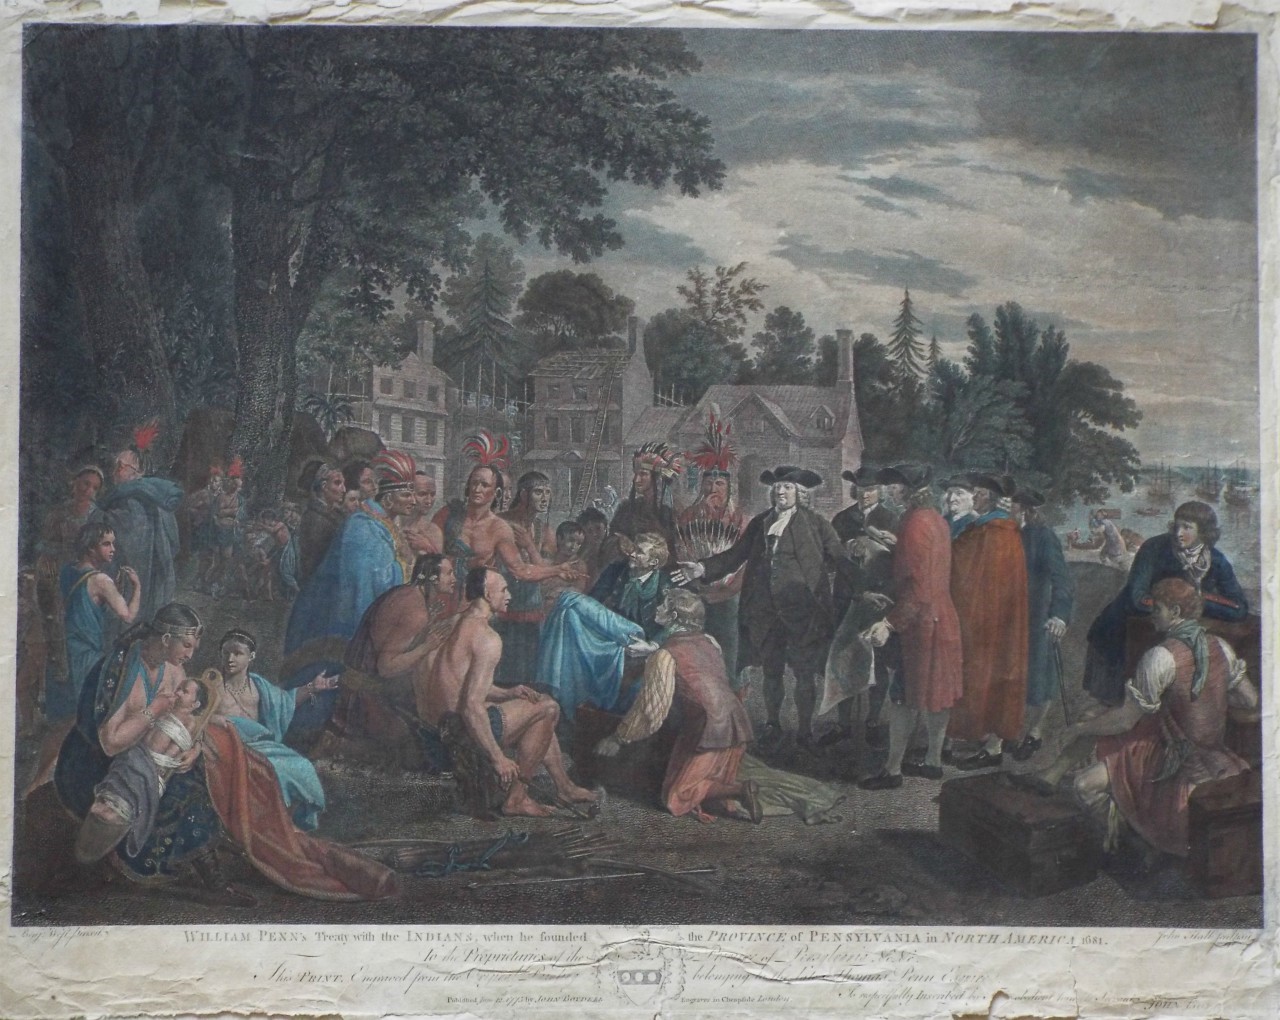 Print - William Penn's Treaty with the Indians, when he founded the province of Pensylvania in North America 1681. - Hall